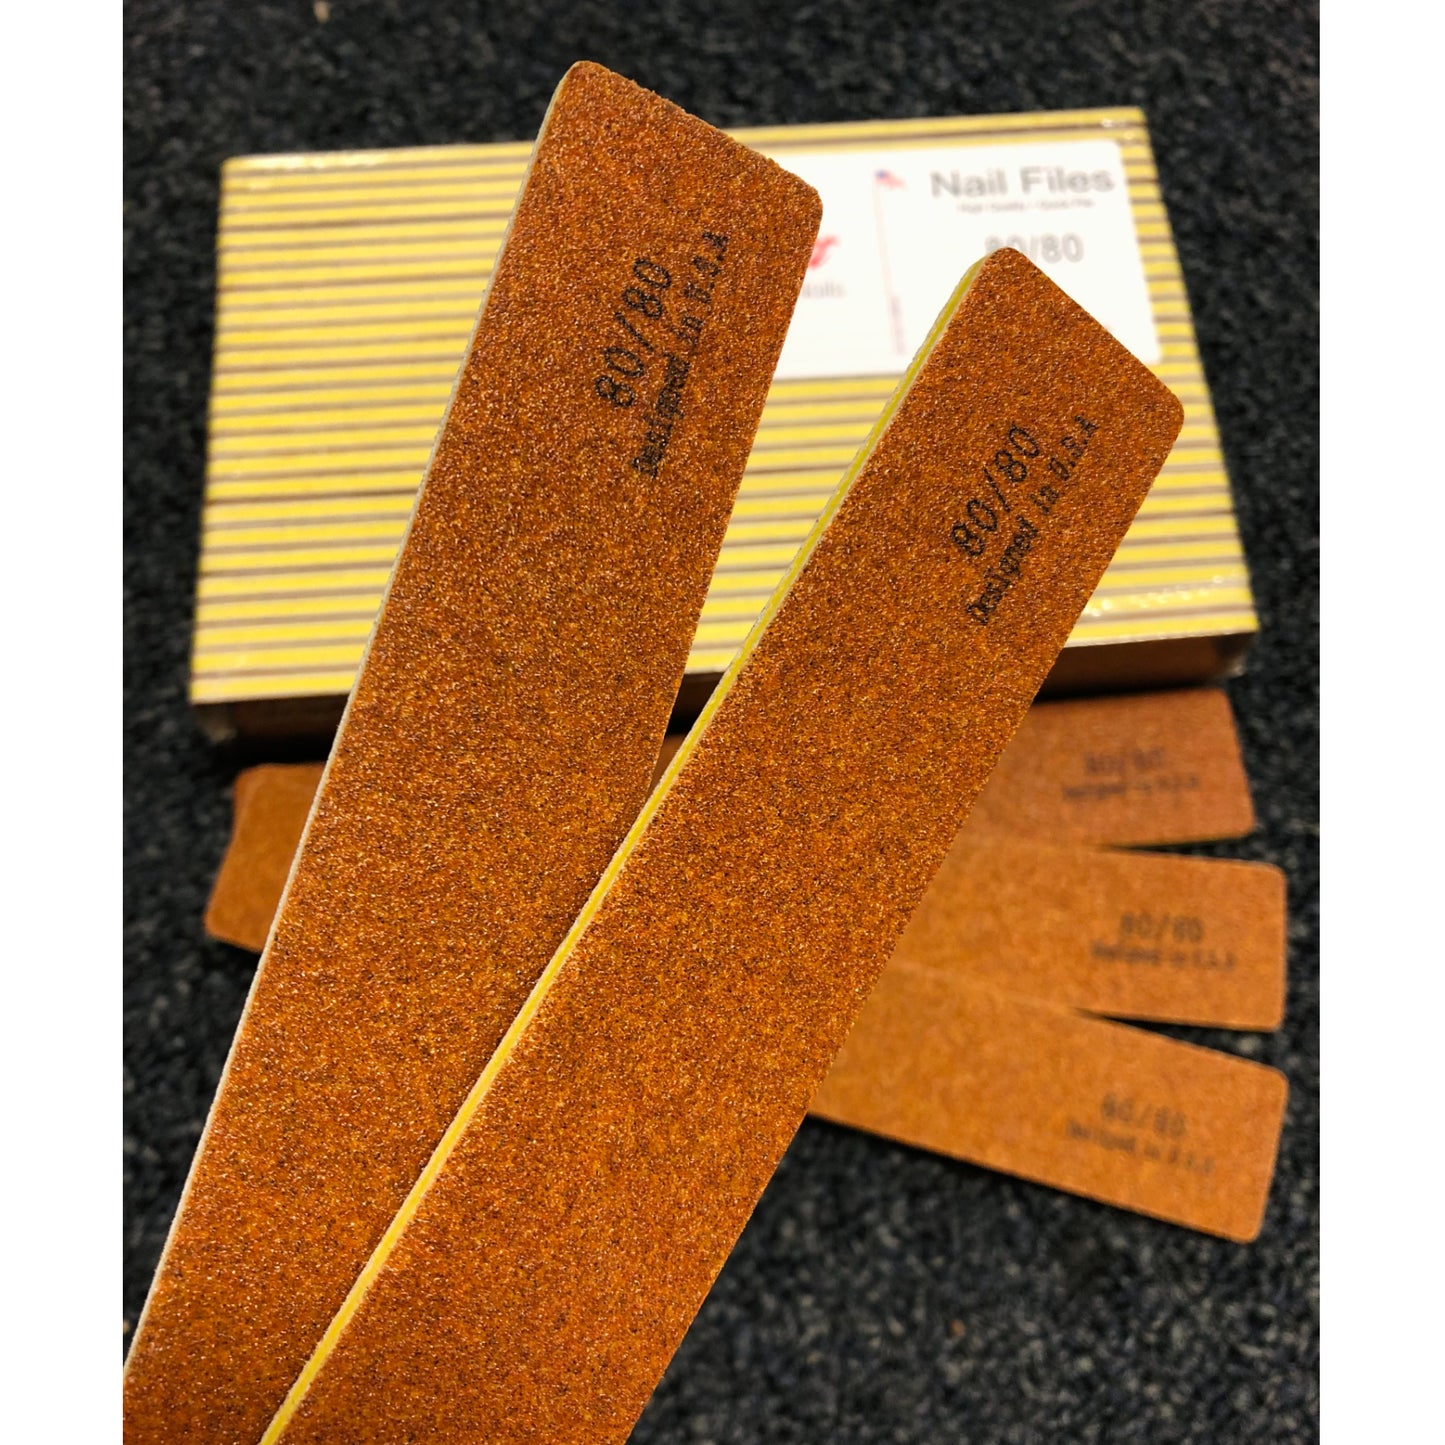 Garnet Nail Files is made of supper premium, washable, sharp and durable abrasive Japanese Origin . This is one of the best nail file for acrylic nails.